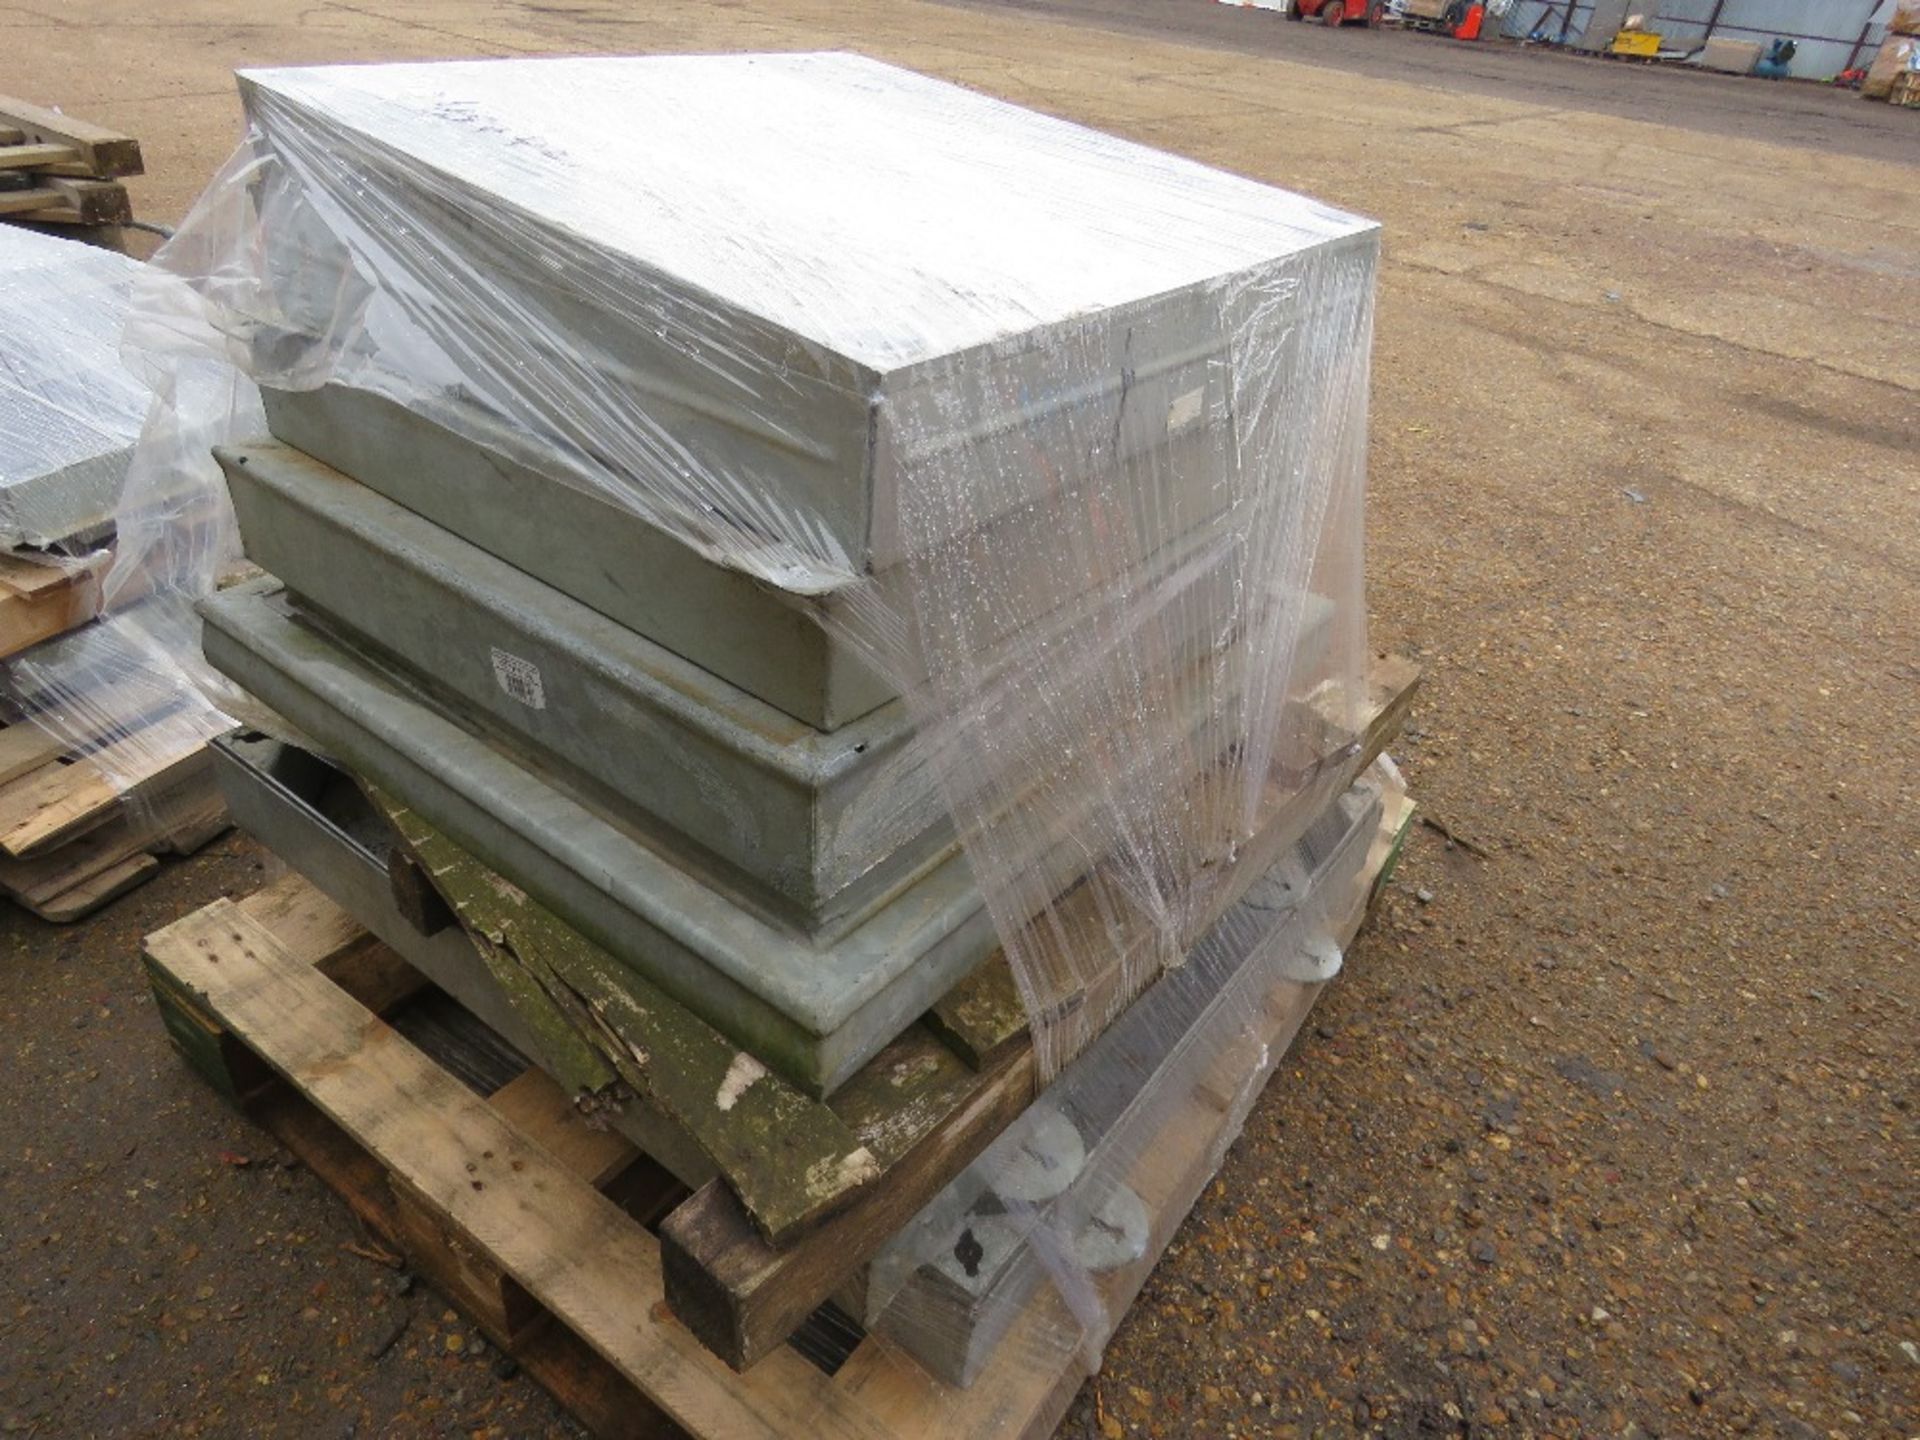 2 X PALLETS OF MANHOLE COVERS WITH SURROUNDS: 4 X GALVANISED 600X600X100 B125 UNITS PLUS 1 X 850X850 - Image 4 of 4